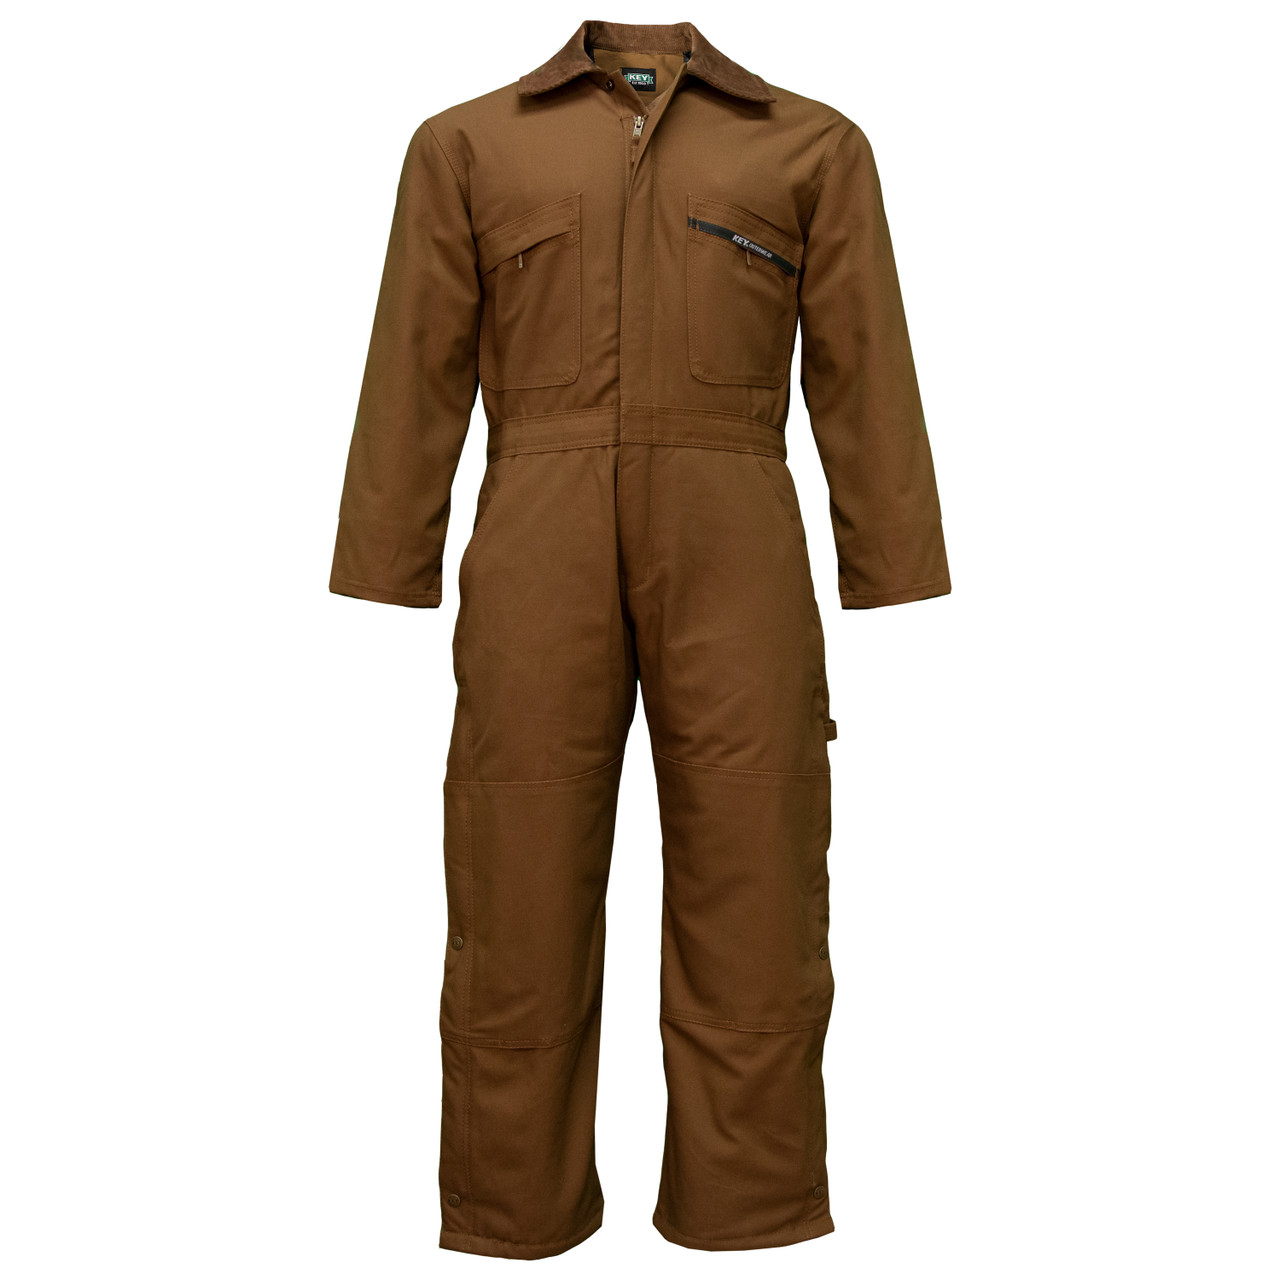 Insulated Coveralls for Men | Quality Workwear